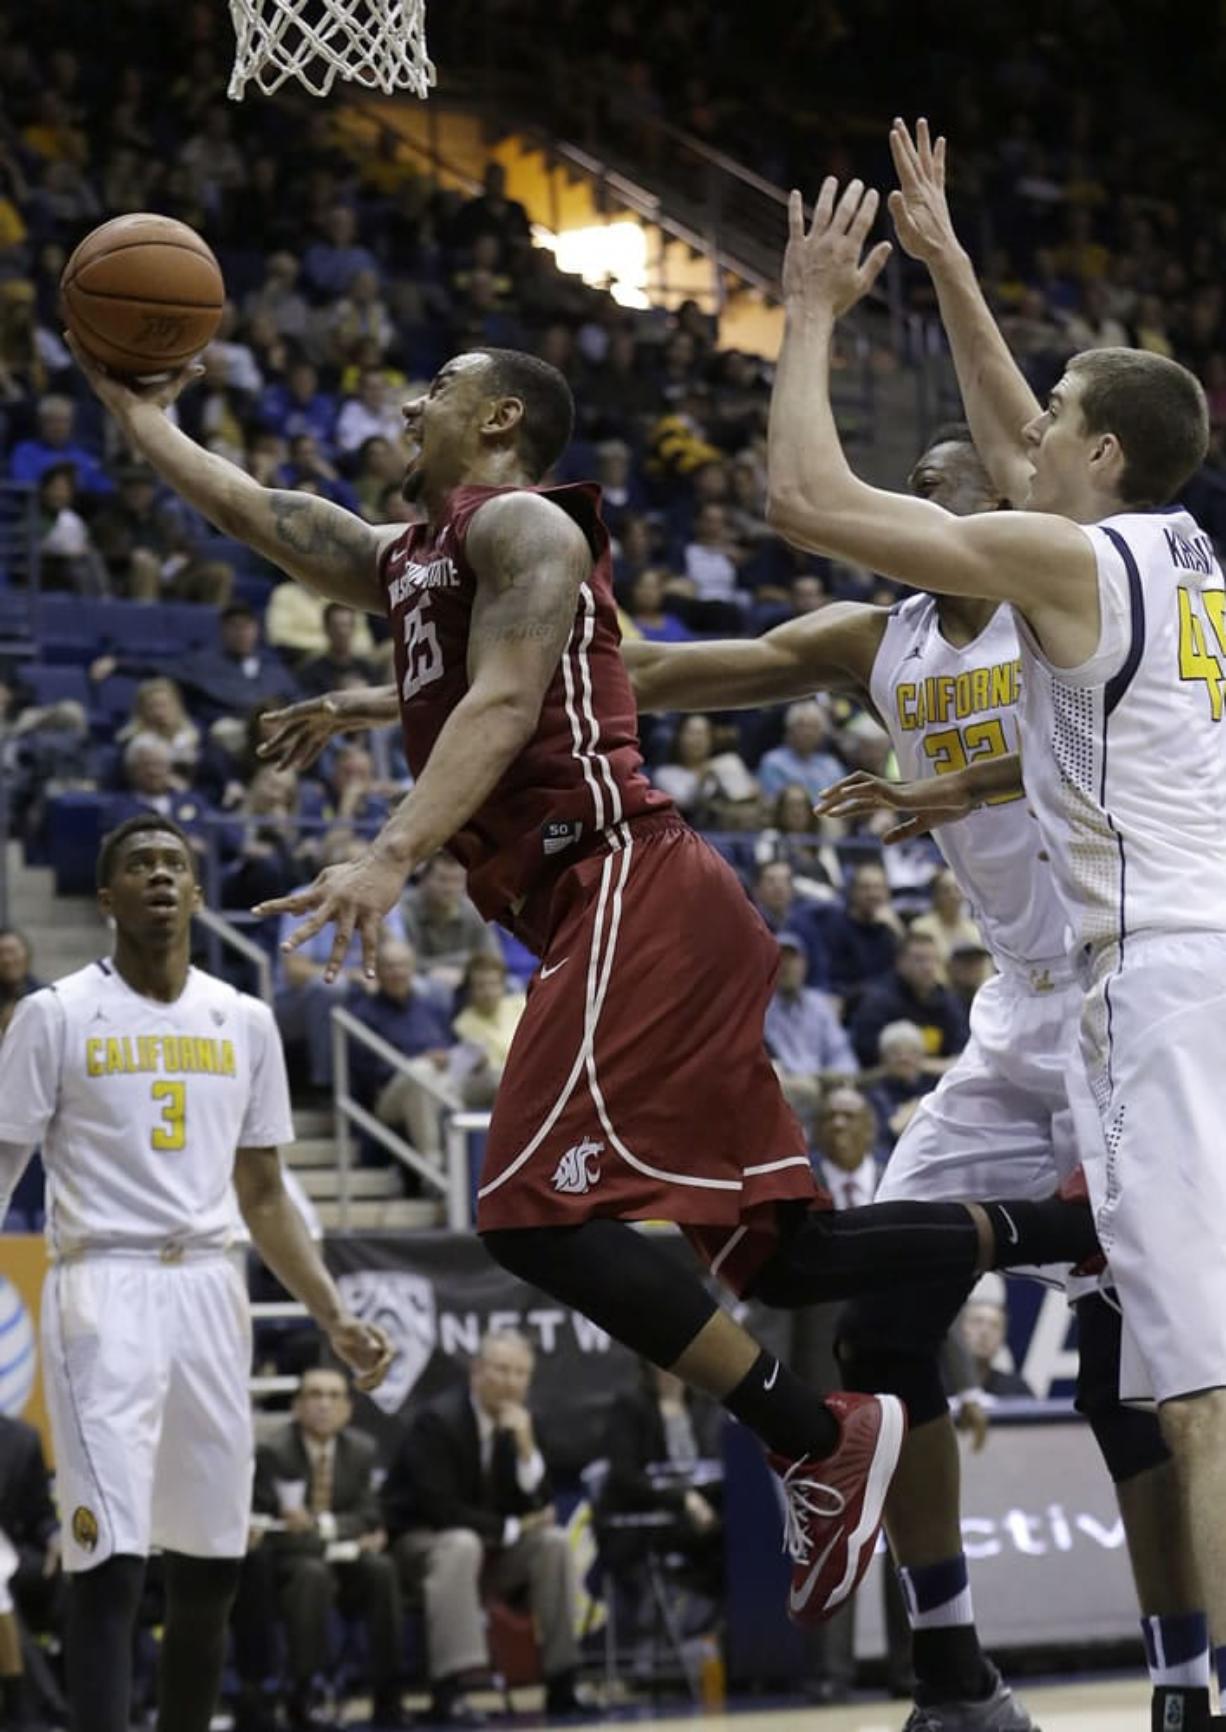 Washington State guard DaVonte Lacy (25) shoots against California during the second half in Berkeley, Calif., on Sunday, Jan. 4, 2015. Washington State won 69-66.